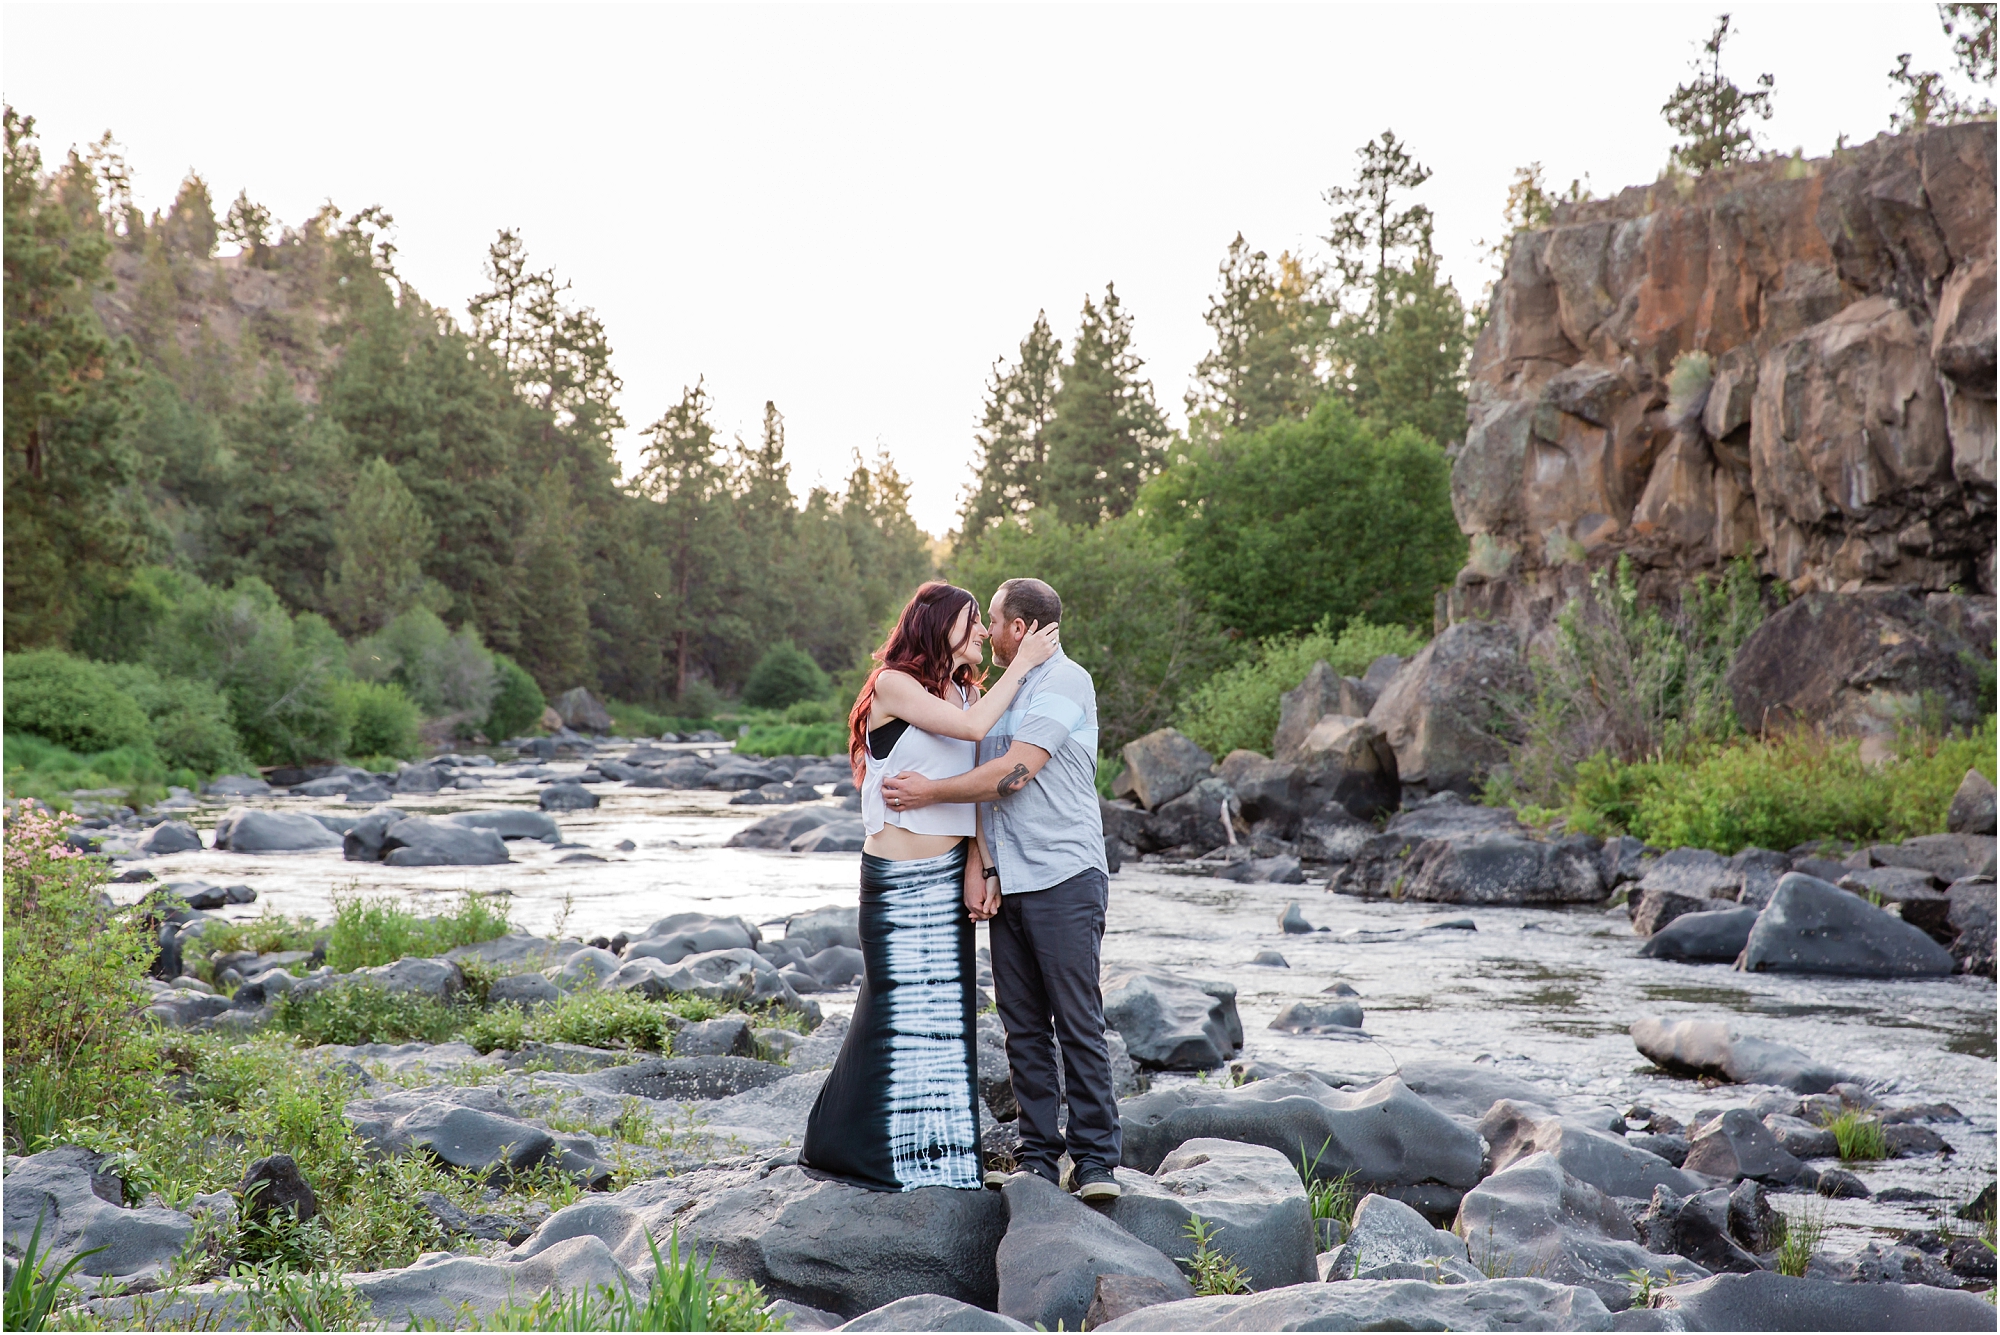 A couple kisses during their engagement session at Sawyer Park along the Deschutes River in Bend, OR. | Erica Swantek Photography